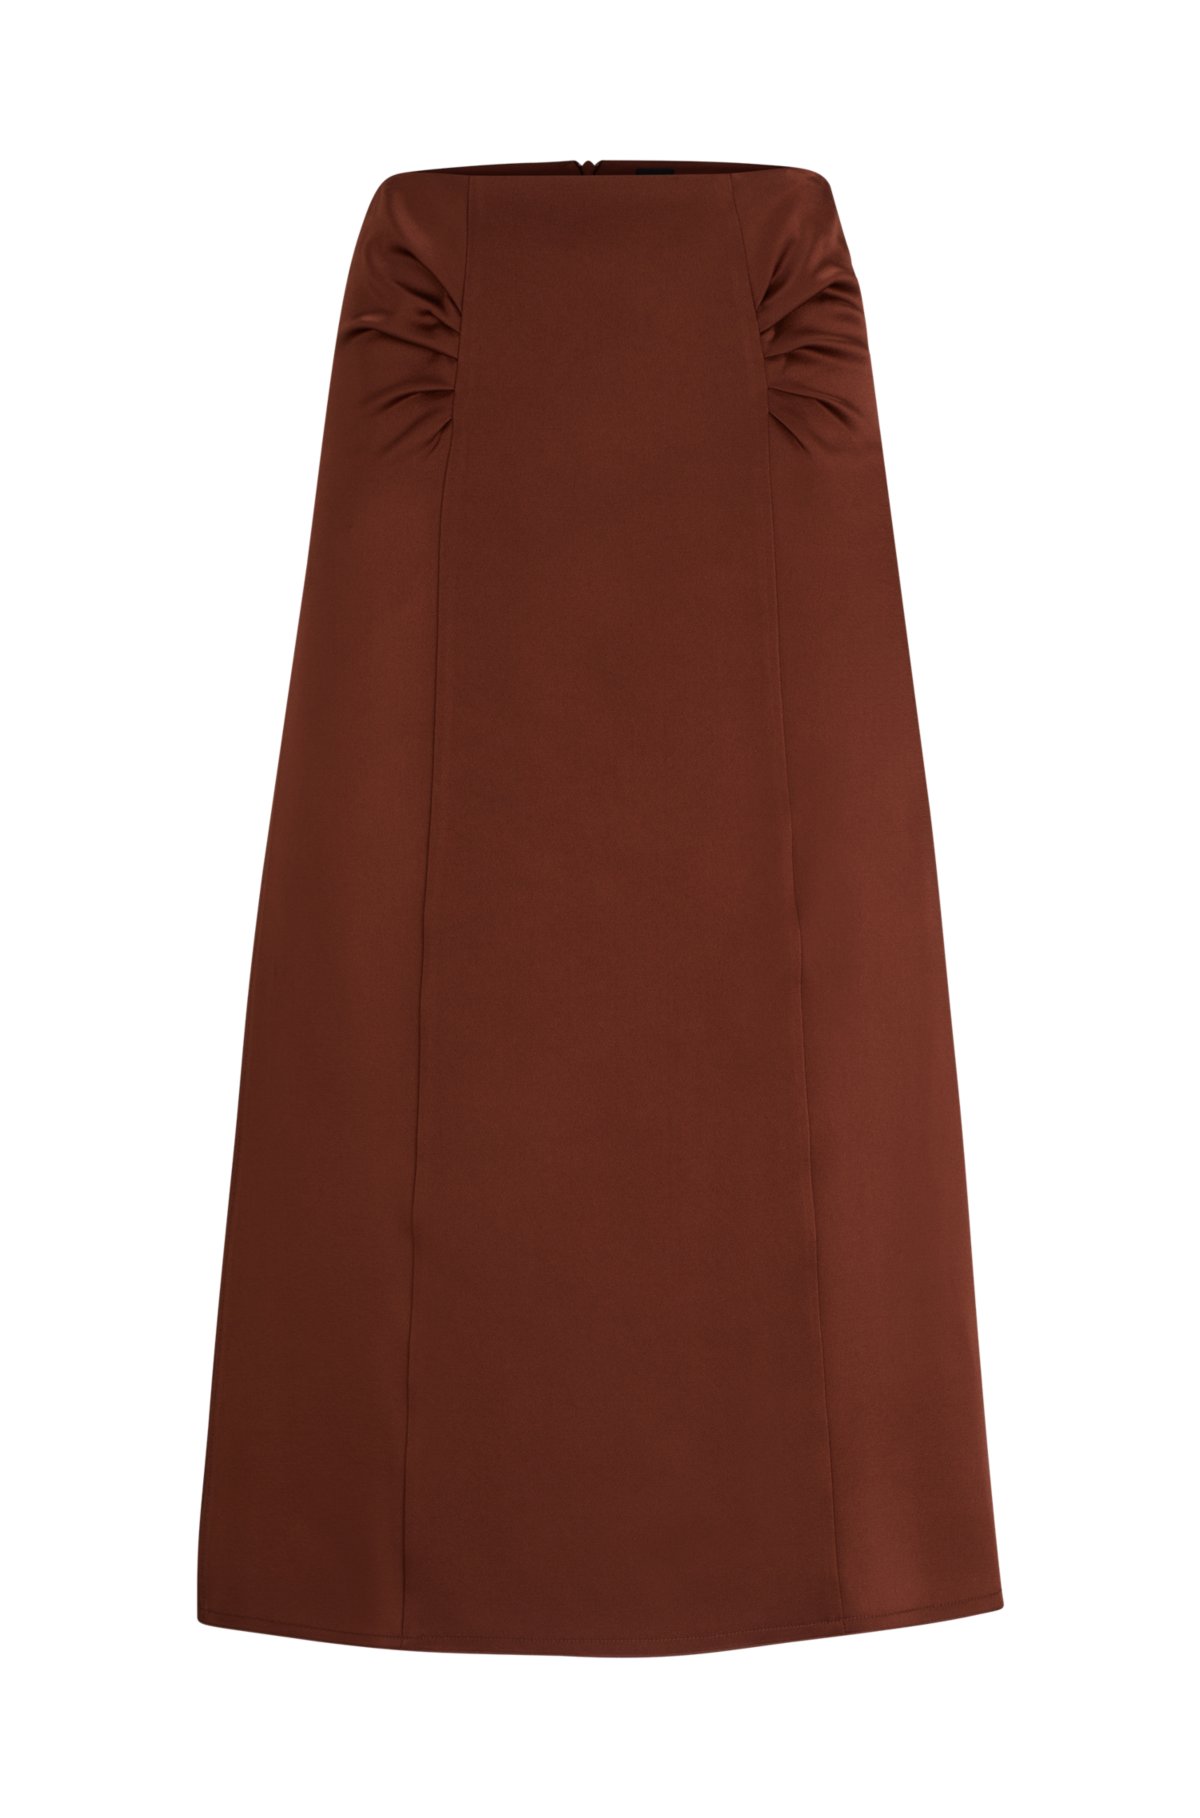 High-waisted A-line skirt with gathered details, Brown